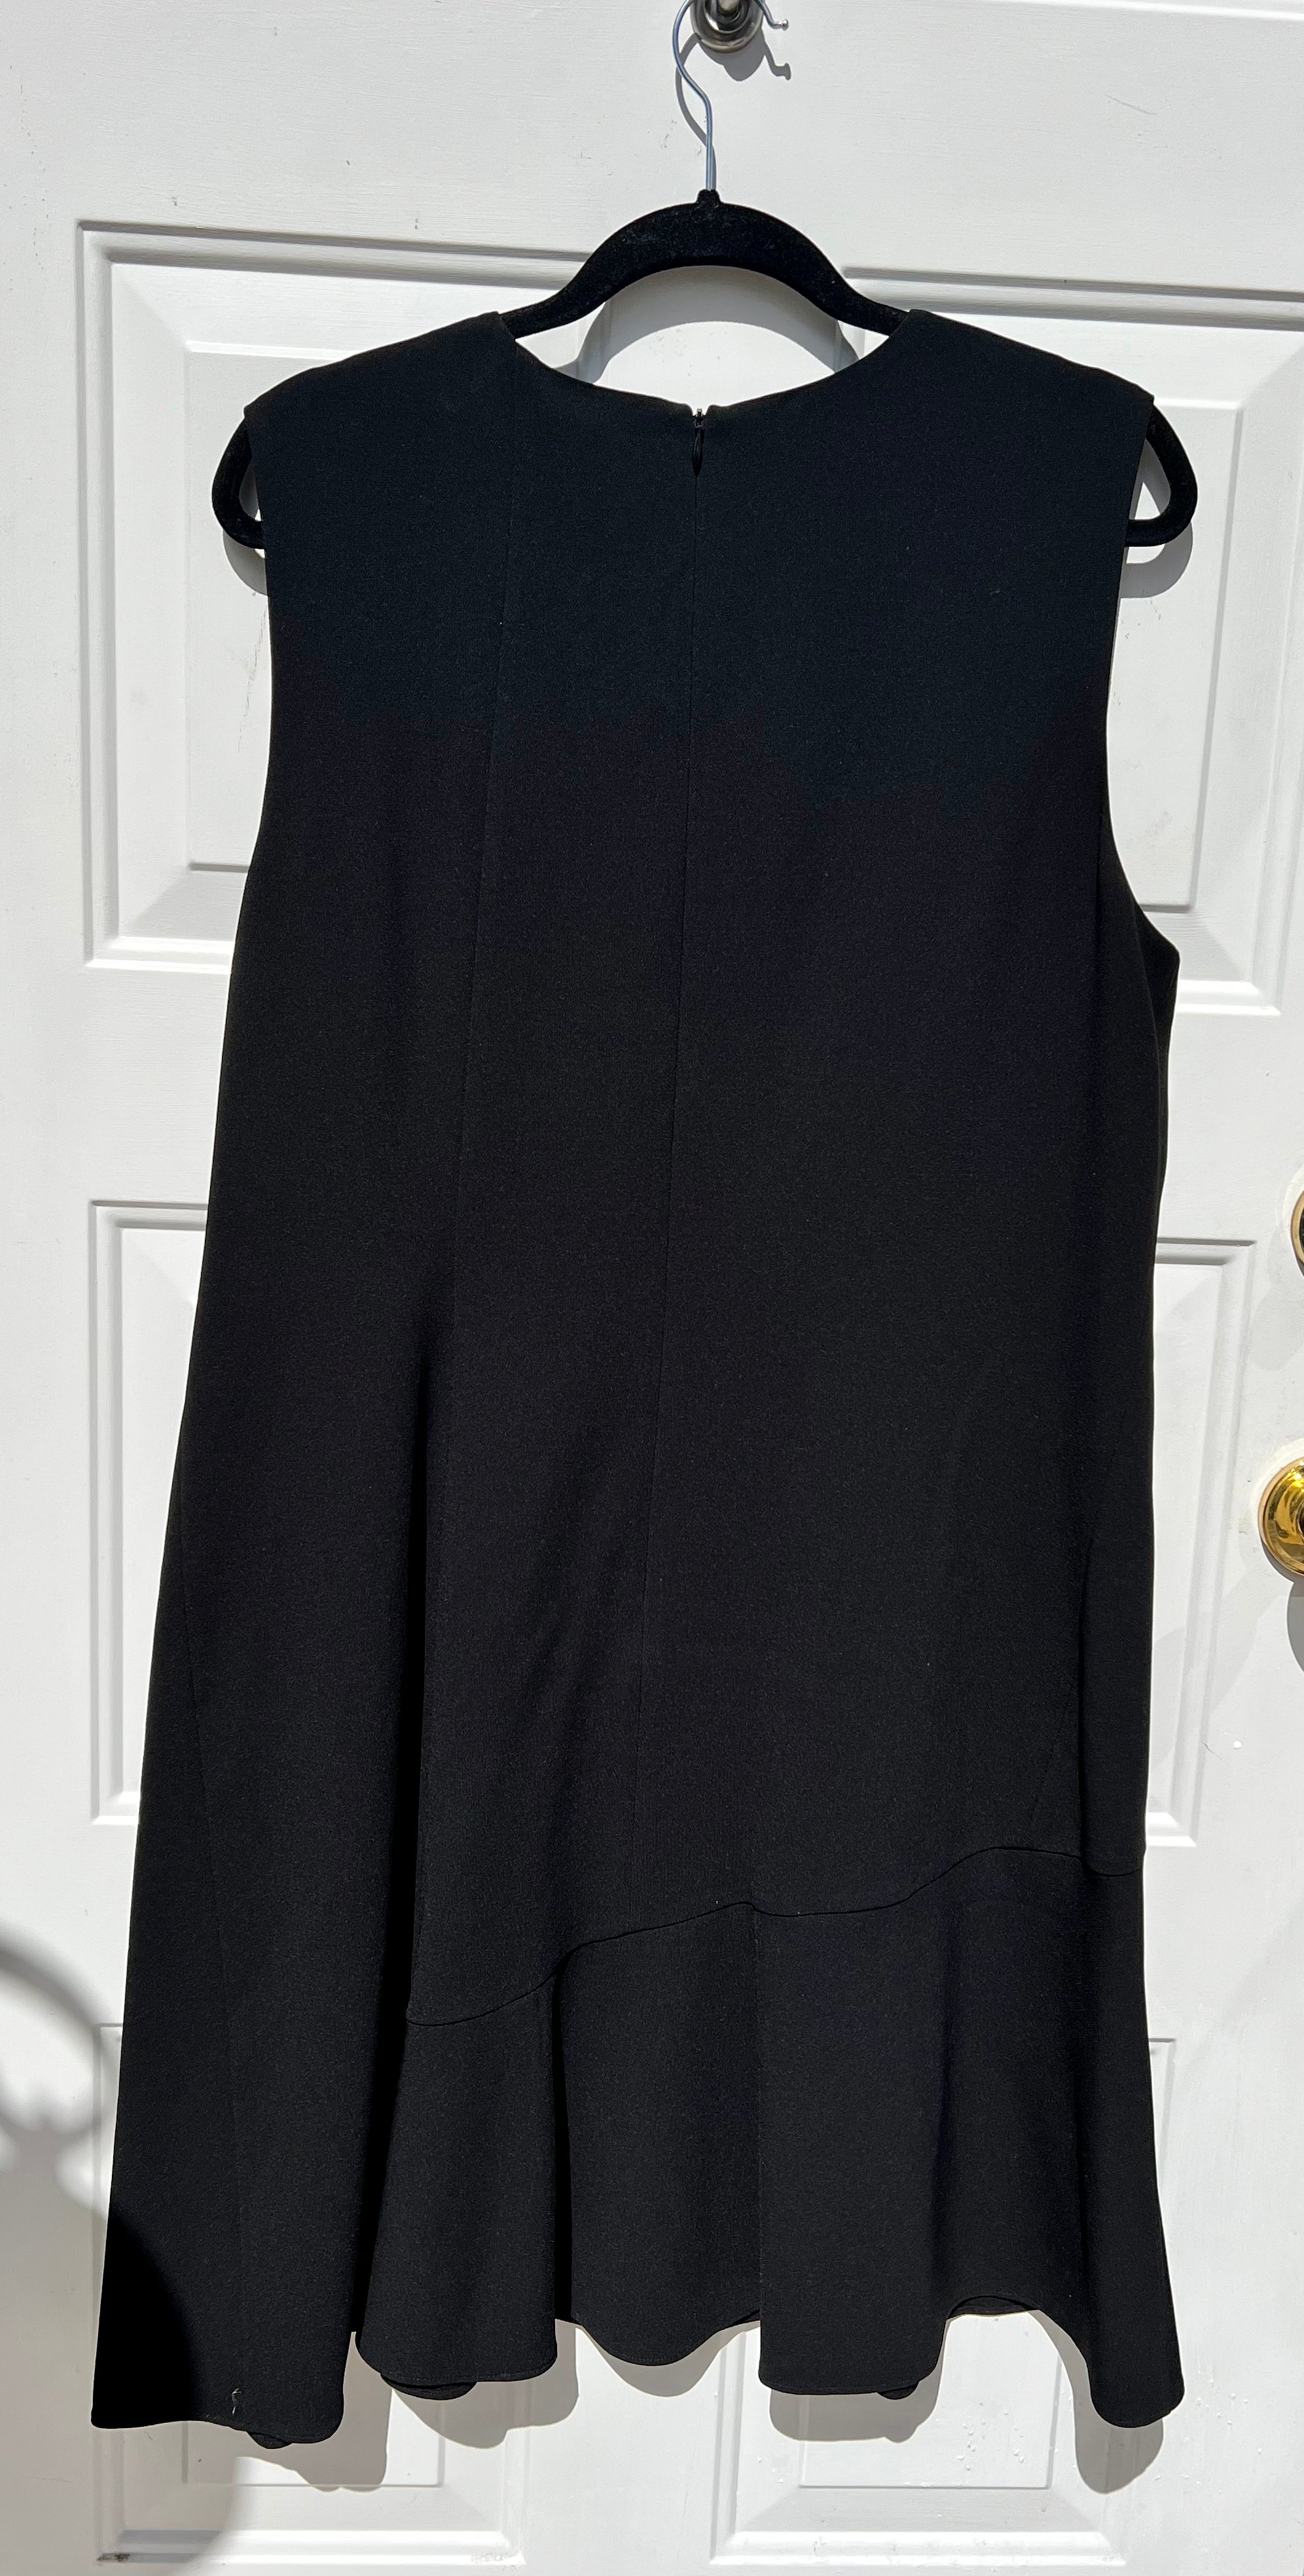 Theory Asym Drape Fit-and-flare dress size 18